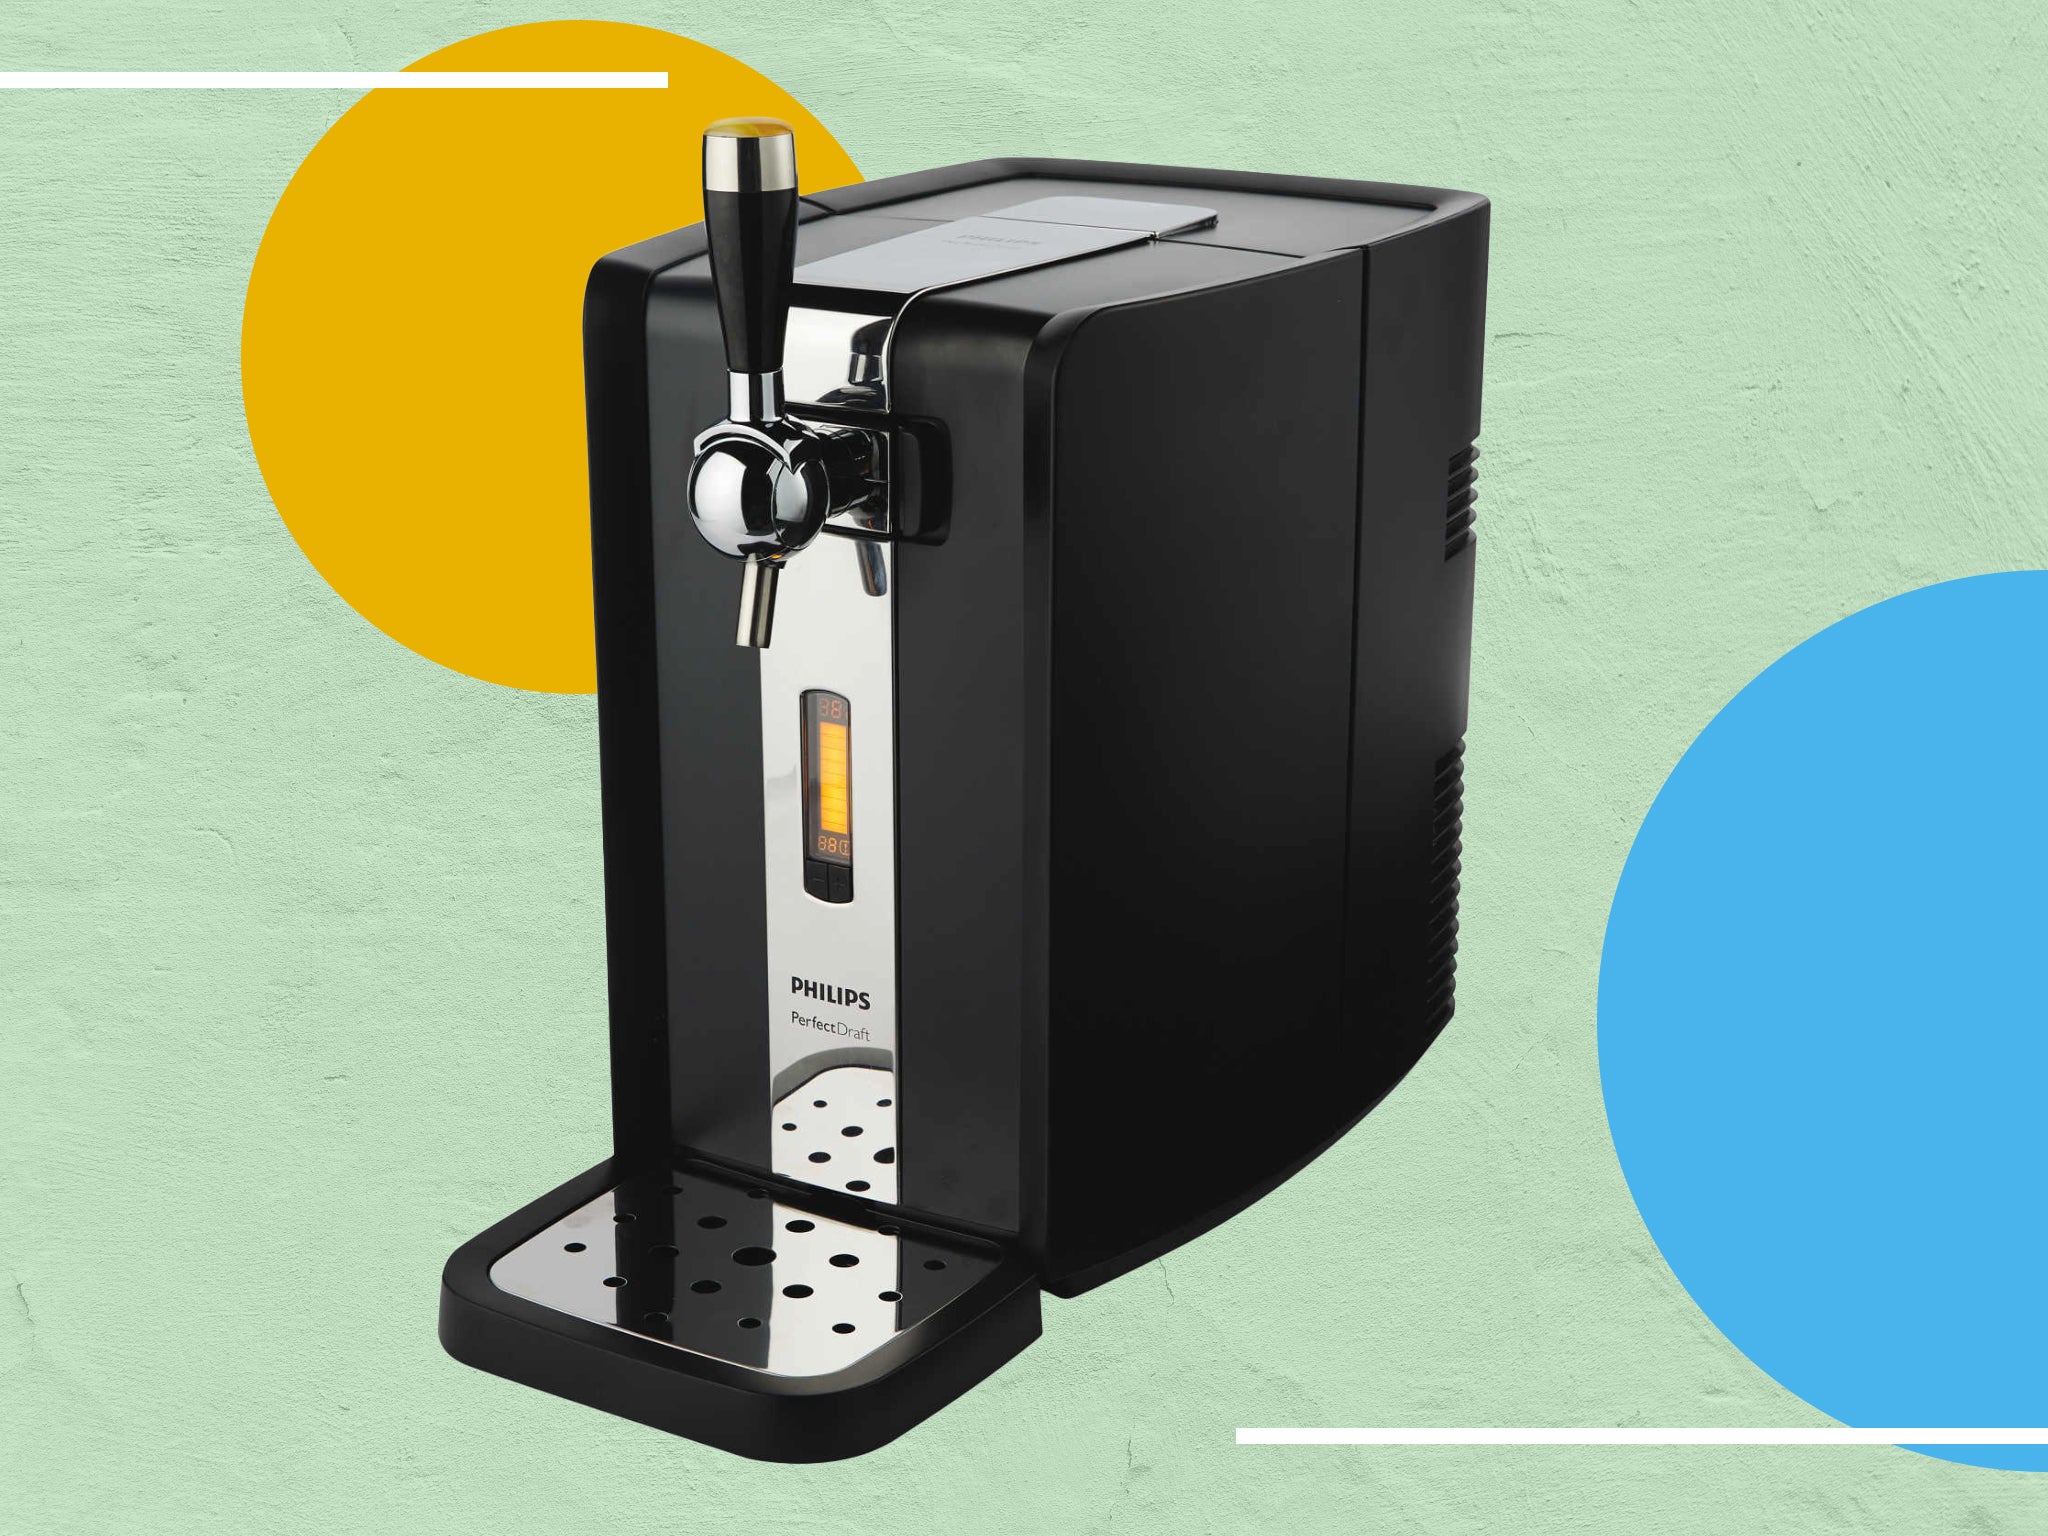 Aldi's selling the Philips perfect draft beer dispenser right now